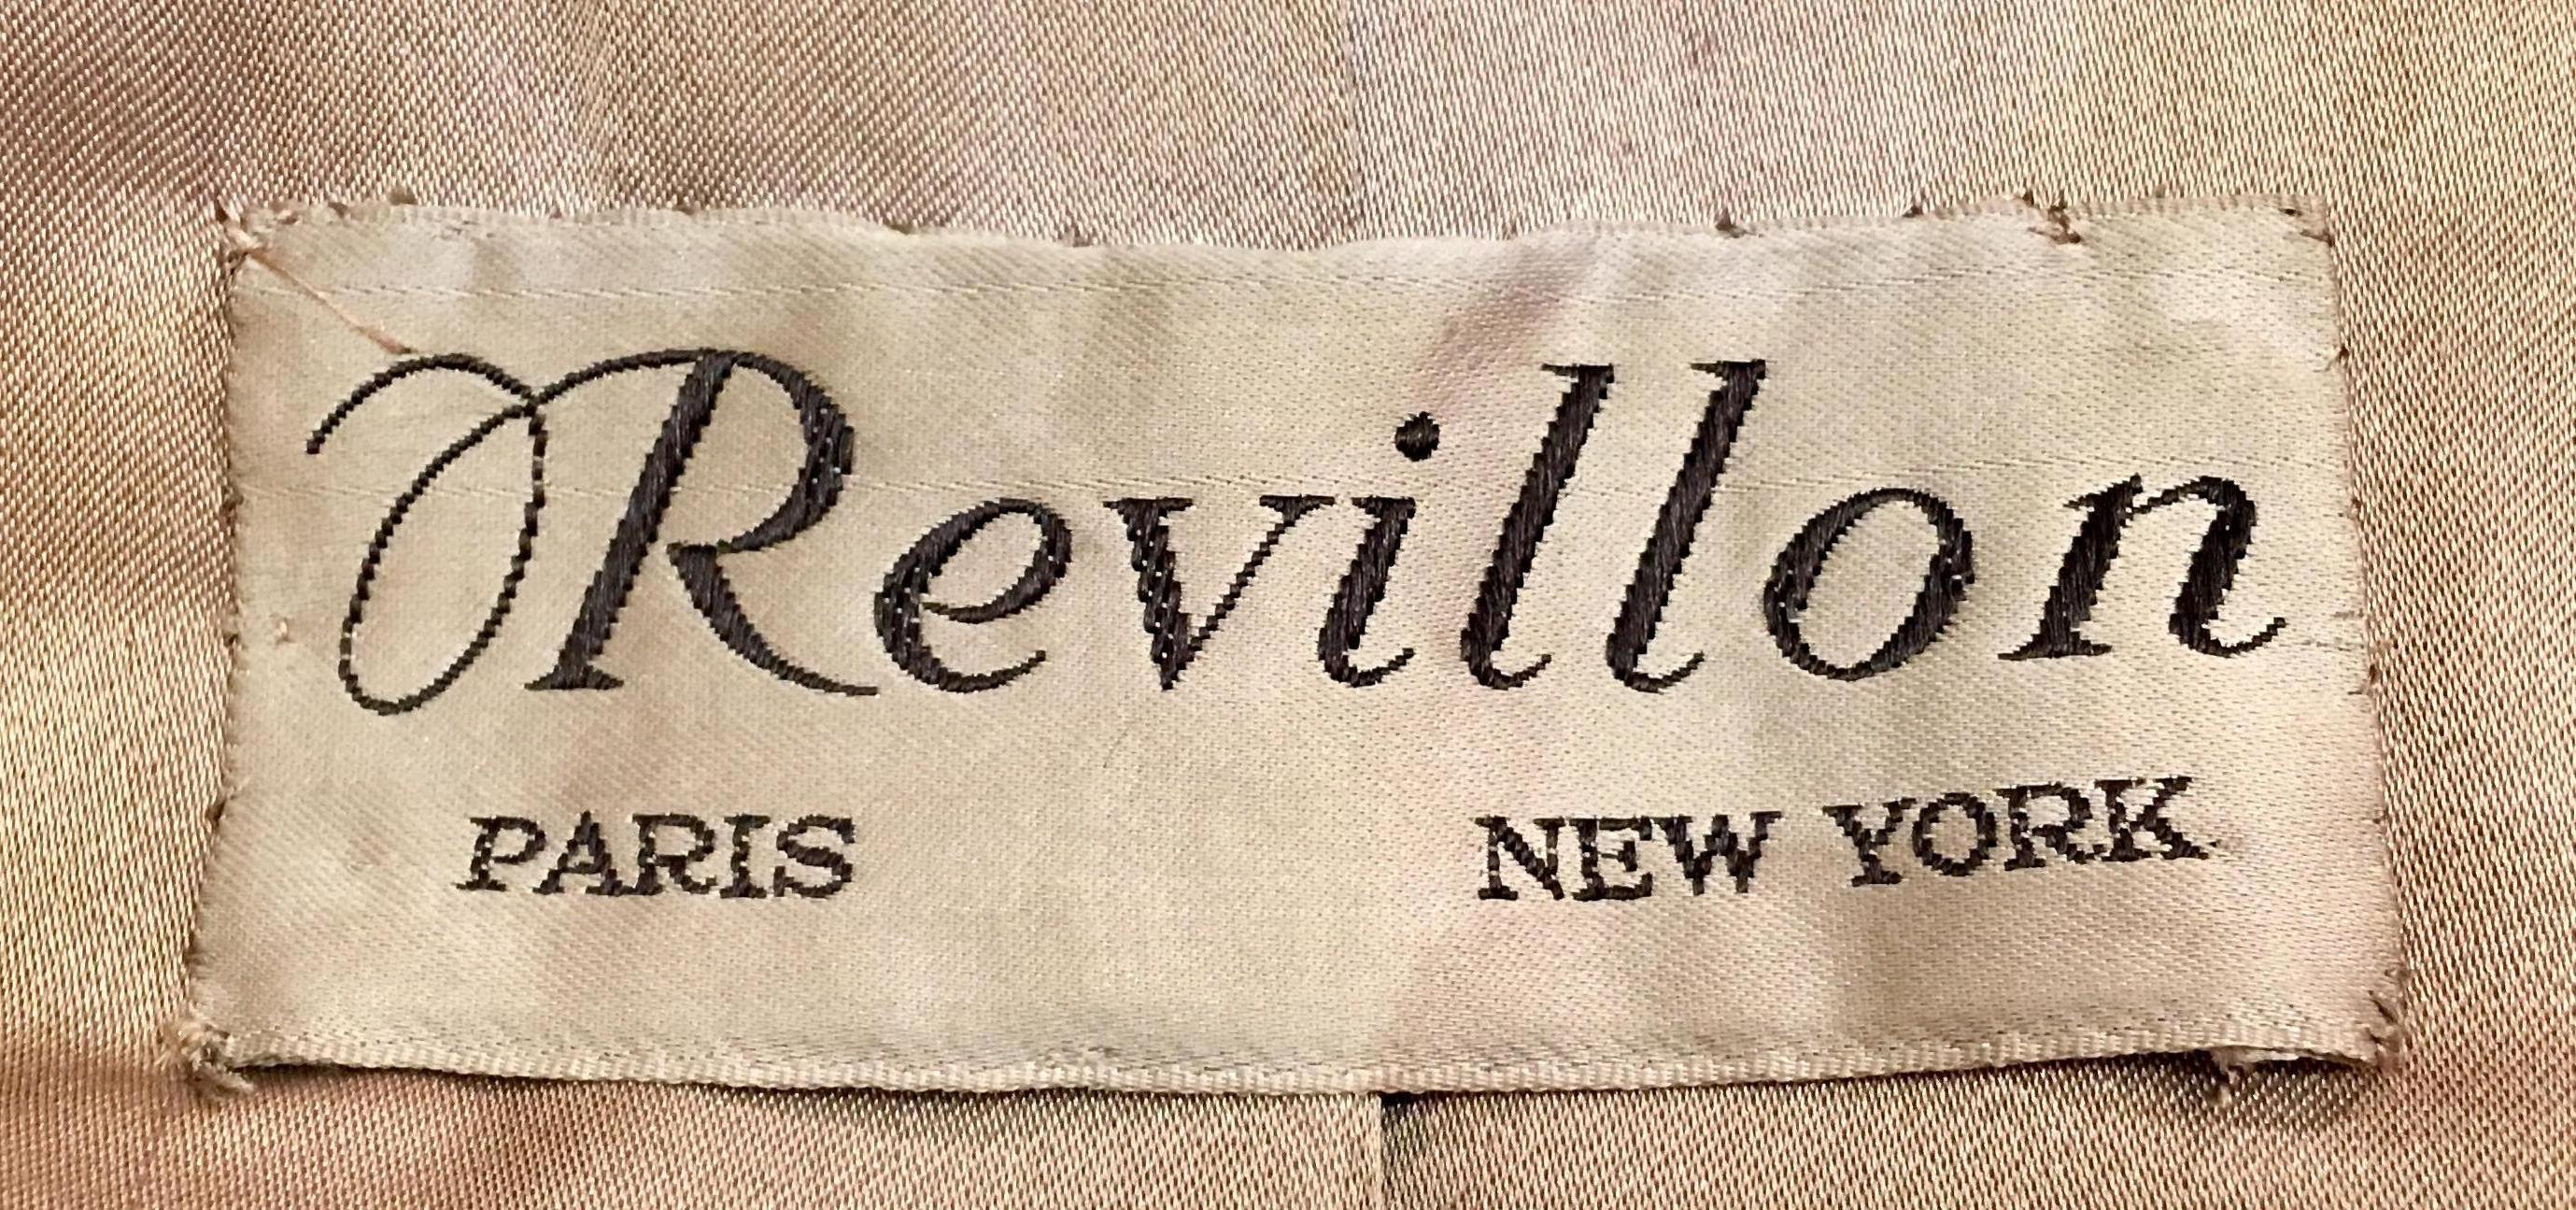 Sumptuous Siberian lynx full length fur coat by Revillion Paris New York, evokes glamour and style.  Classically tailored with a large shawl collar, hook and eye closures, slash pockets, belt openings and satiny taupe color fabric lining with velvet